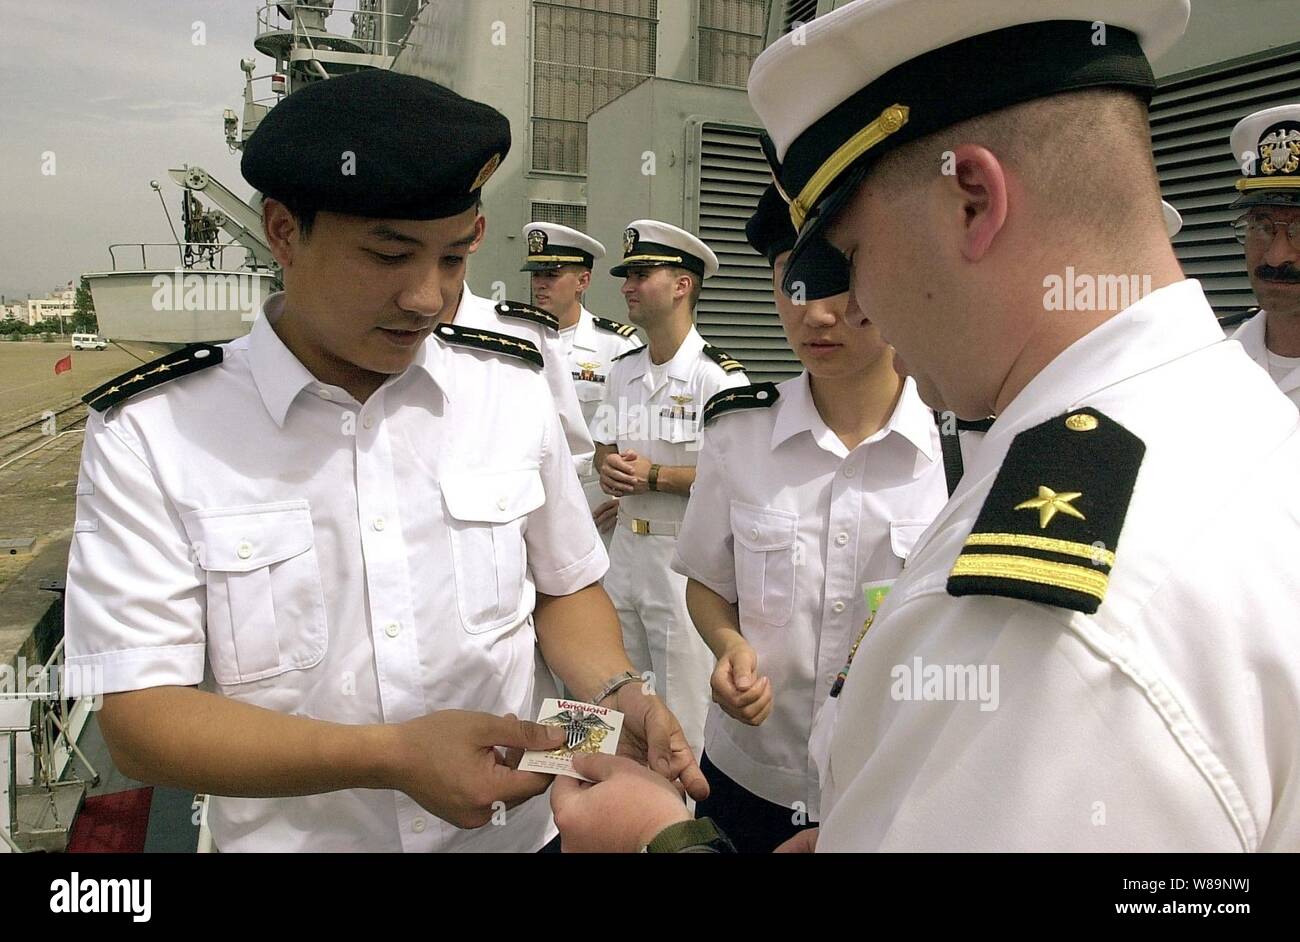 U.S. Navy Lt. j.g. Bruce Sutherland (right) gives Capt. Wen Hai Wu (left) of the People's Liberation Army (Navy) a U.S. Navy officerХs crest as a token of appreciation and goodwill during the port visit of the USS Chancellorsville (CG 62) to Qingdao, China, on Aug. 3, 2000.  Wu and other crew members of the Chinese warship Haerbin (DDG 112) are exchanging visits with the crew of the Chancellorsville while the Ticonderoga class, Aegis guided missile cruiser visits Qingdao. Stock Photo